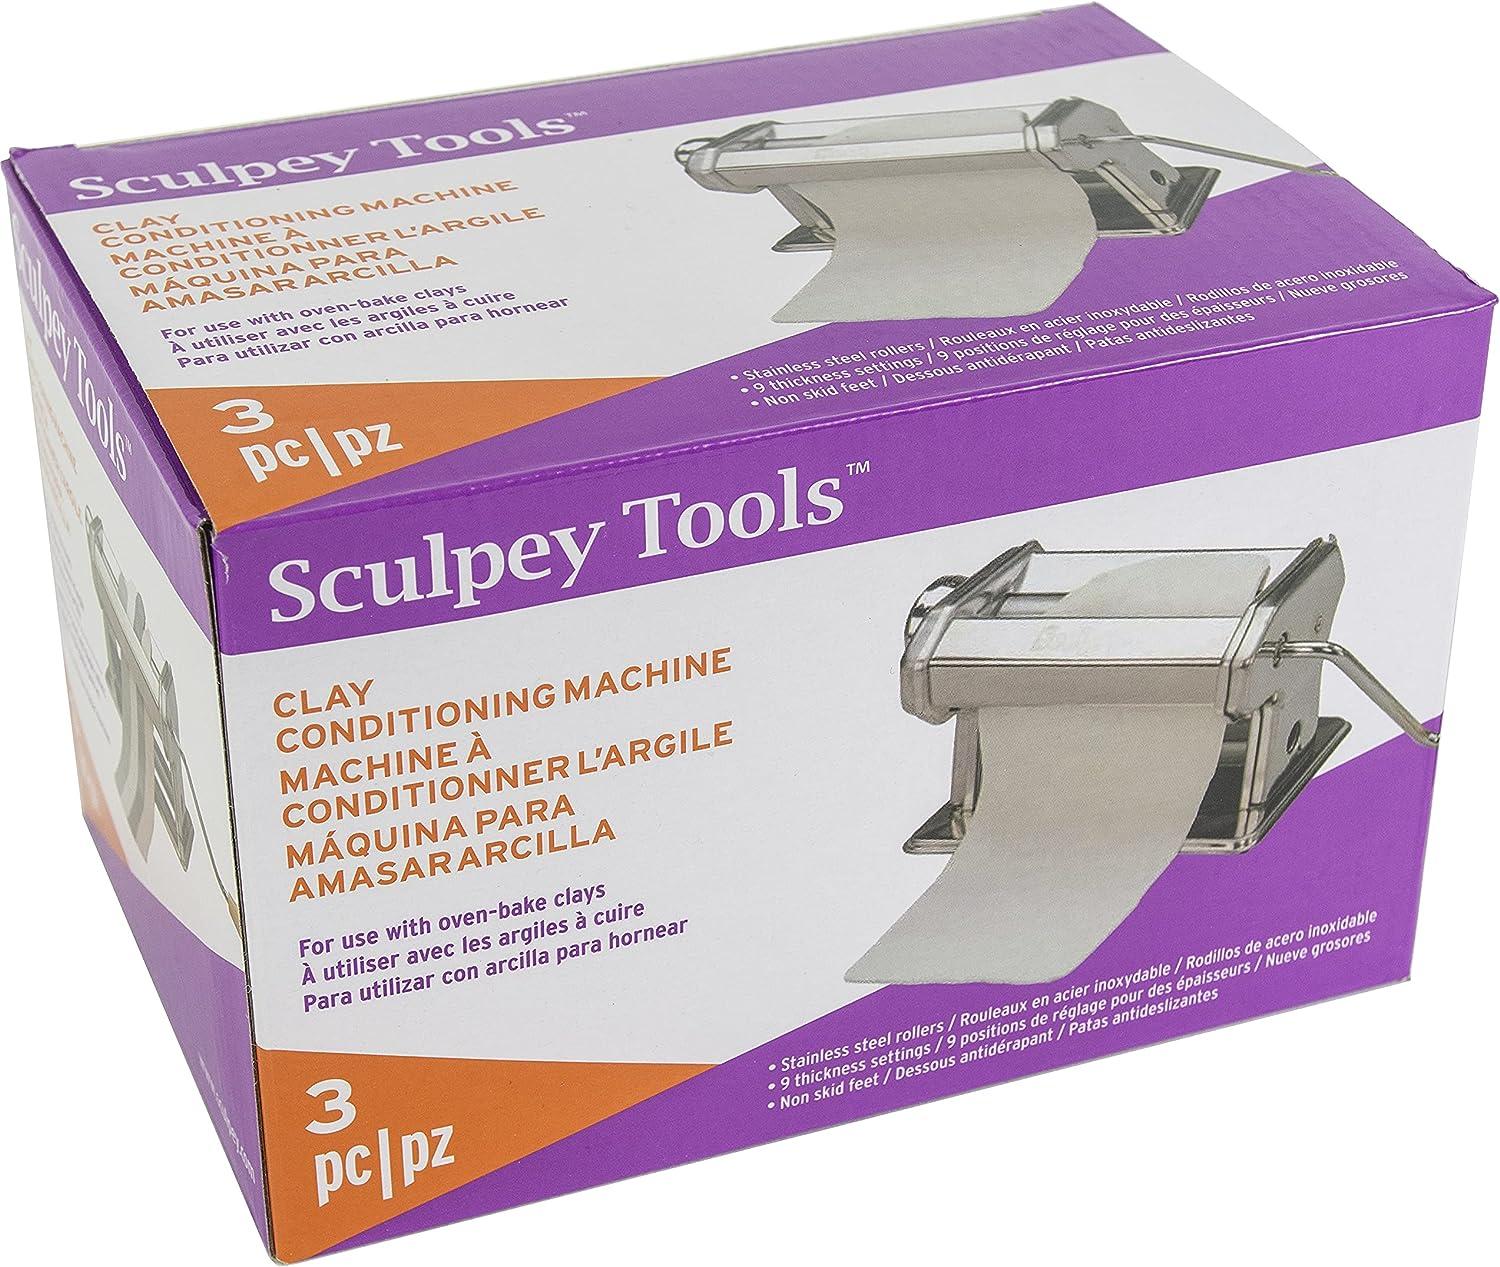  Sculpey Tools Clay Conditioning Pasta Machine, polymer  oven-bake clay tool, 9 thickness settings, includes clamp and hand crank,  great for all skill levels and craft projects